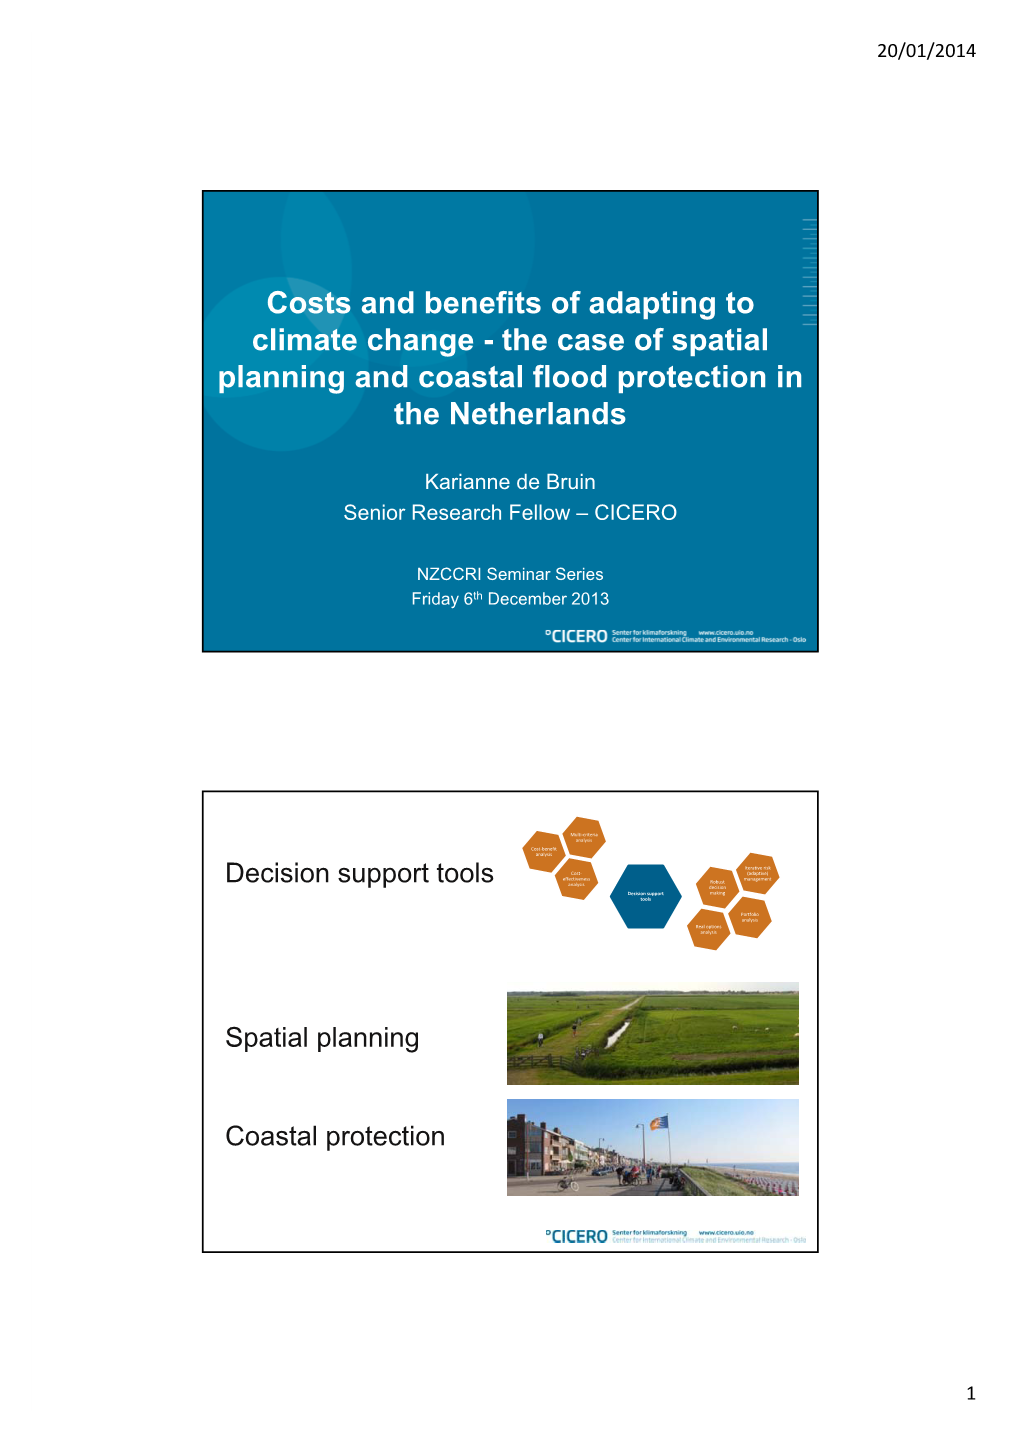 The Case of Spatial Planning and Coastal Flood Protection in the Netherlands